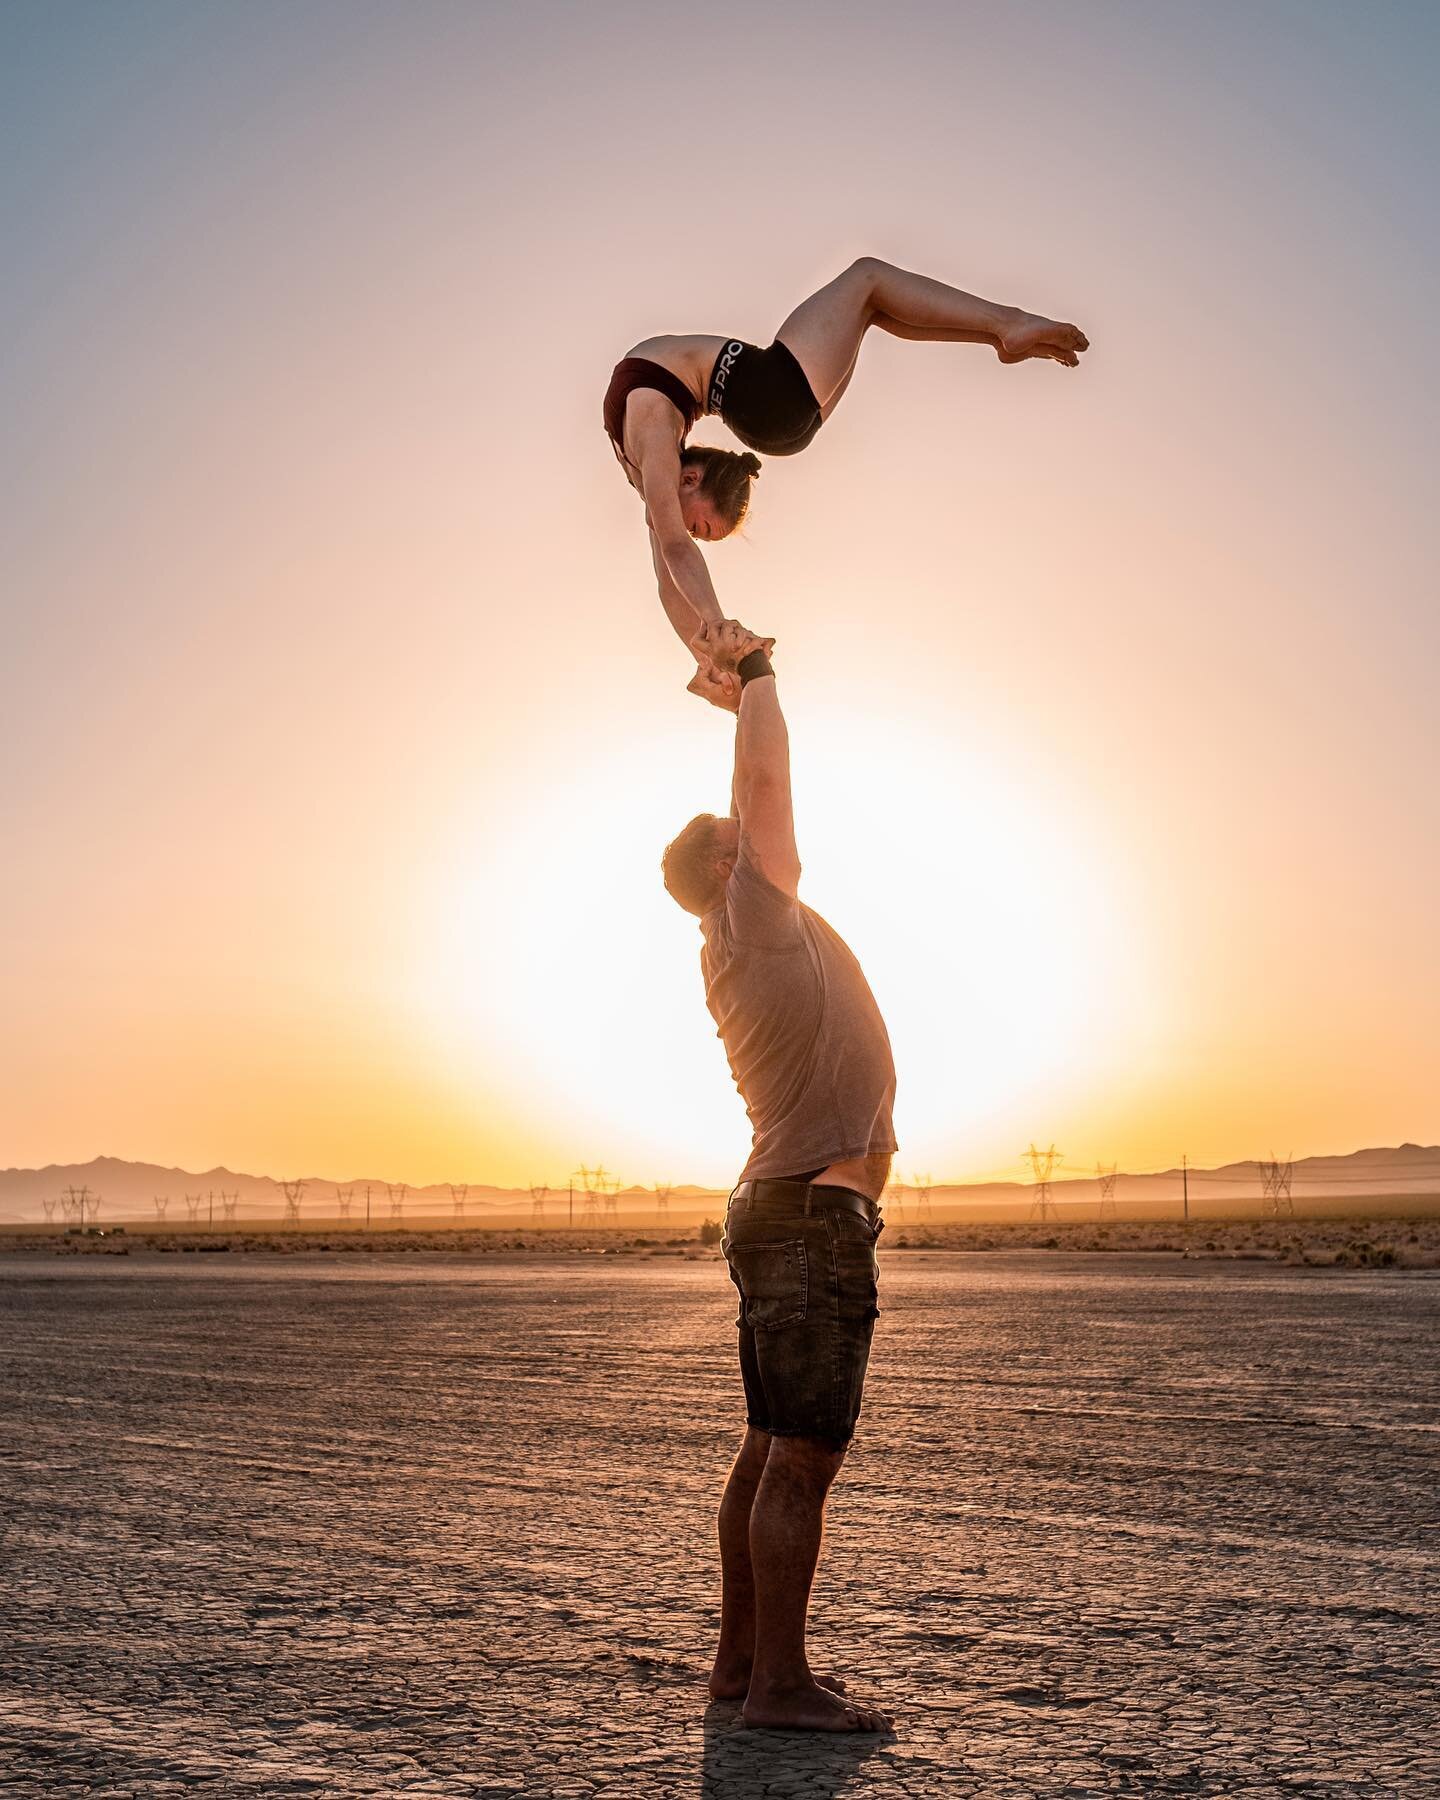 The two sides of sunrise on the dry lake bed, with one of the strongest bases @acroairlines and this incredibly talented flyer @tash_hutch I always love how a 180 turn can make such a big difference in everything about a photo 😂
Ryan, I'm happy I wa